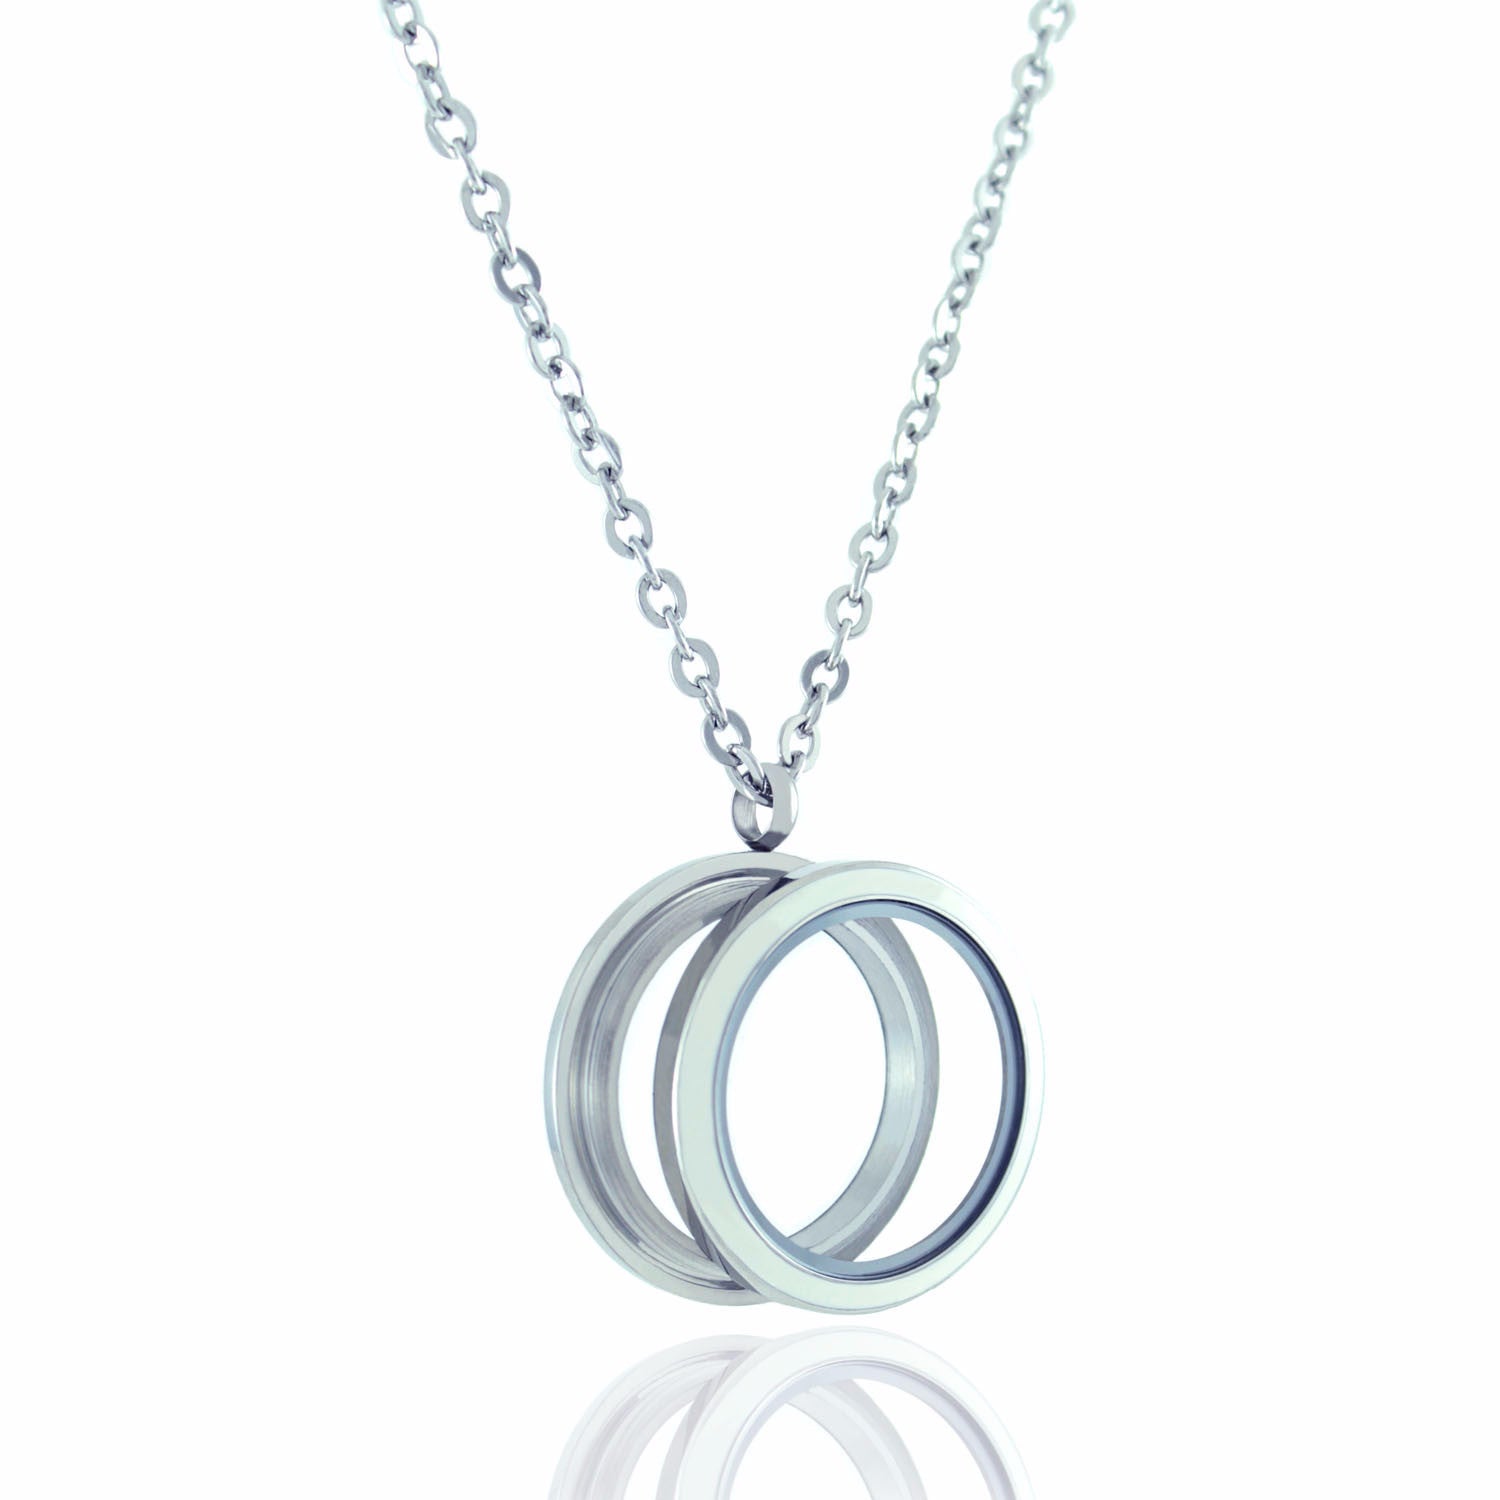 Floating Locket Necklace with Matching Chain and Choice of 6 Charms (Twist White Circle)